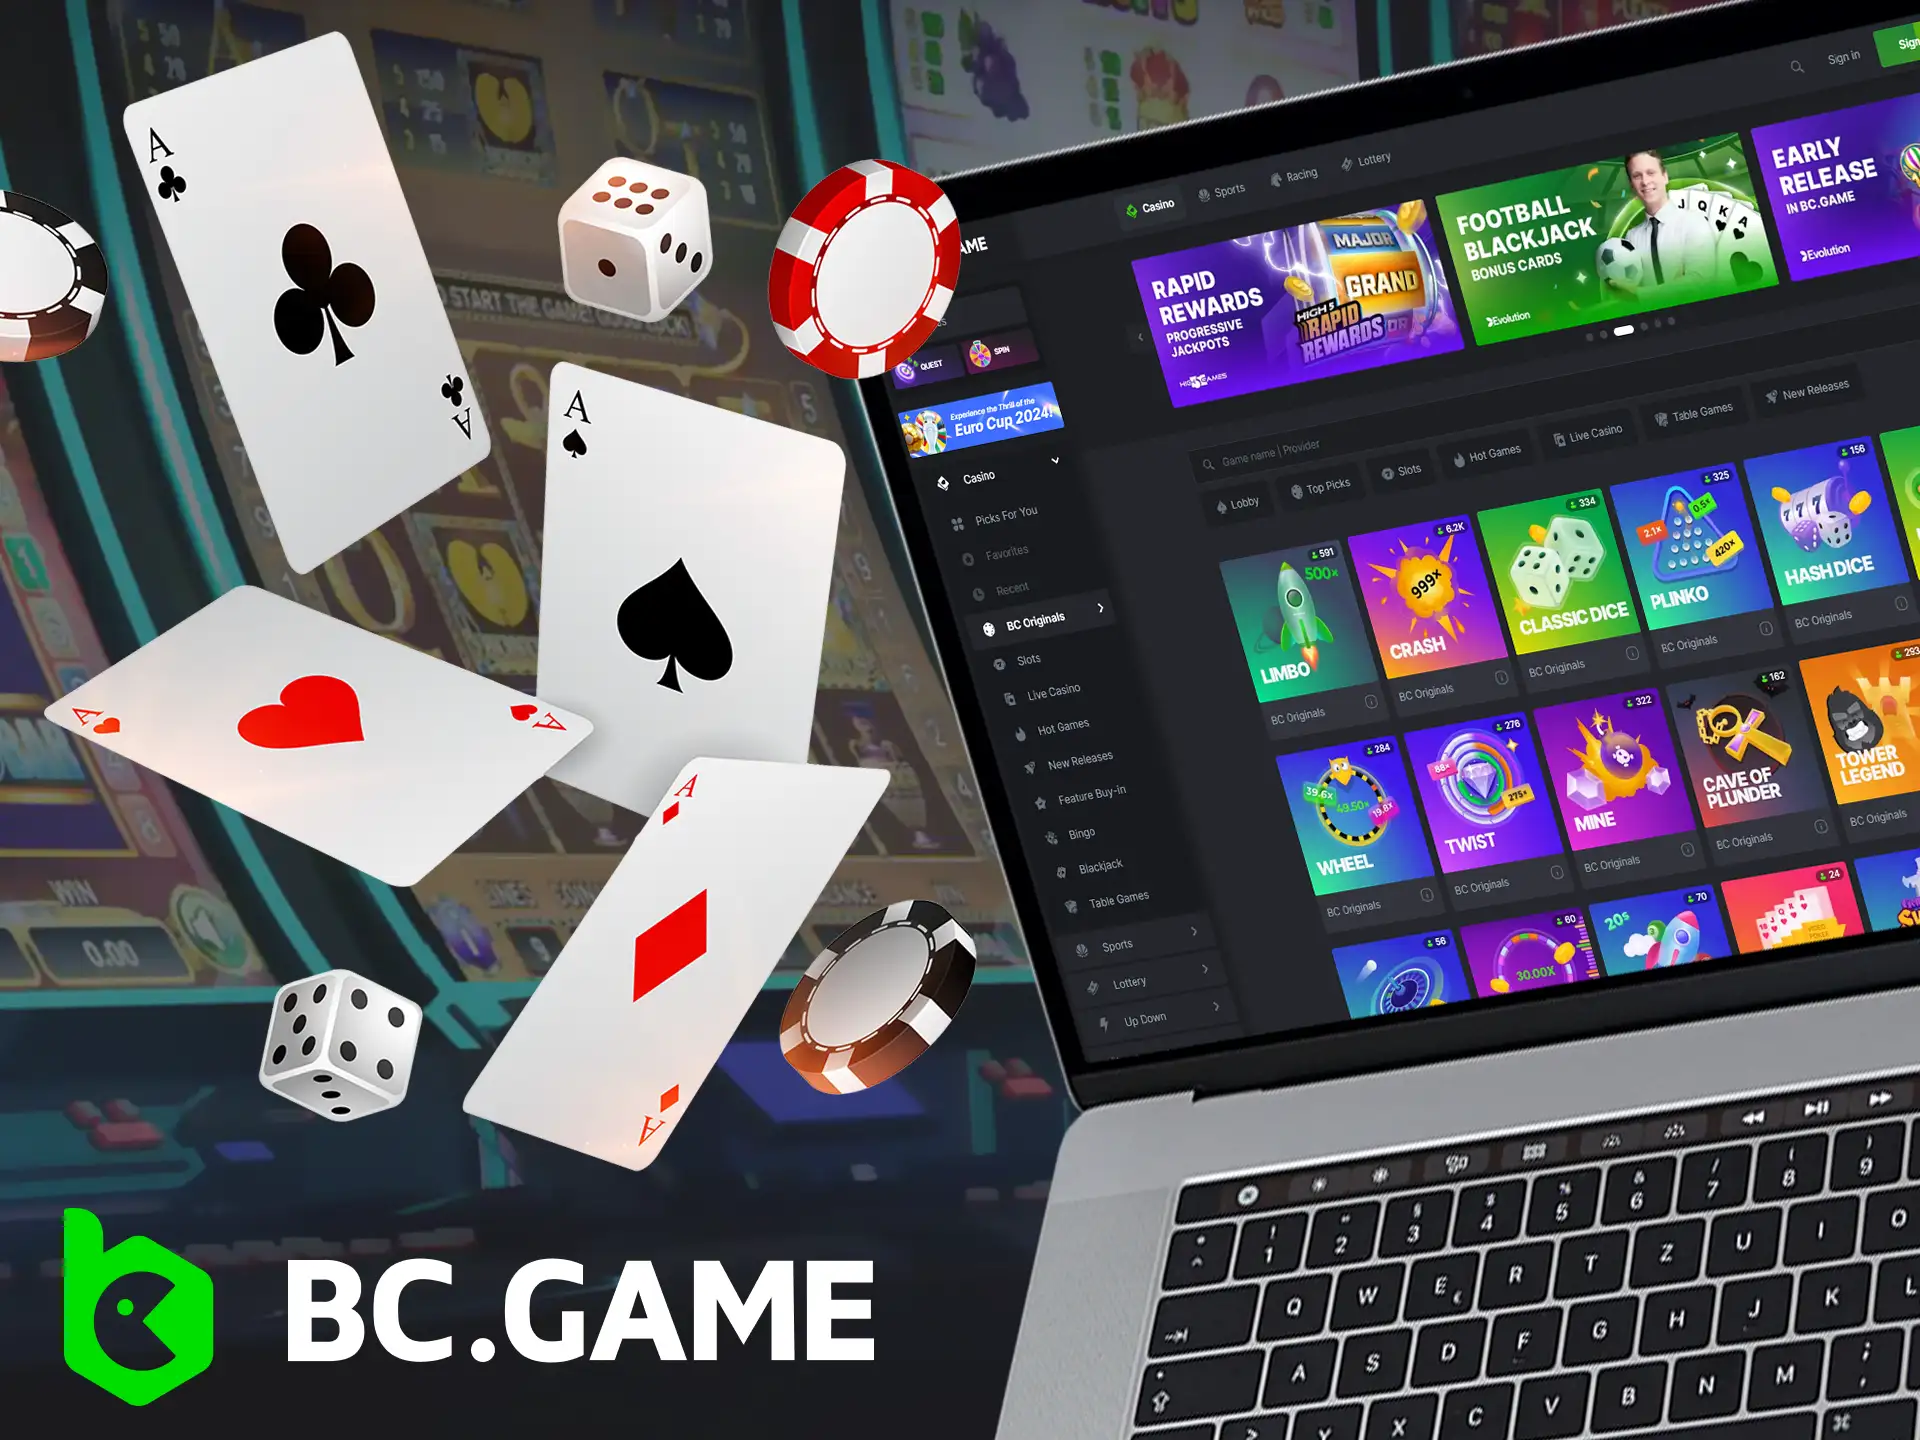 BC Originals is a collection of games designed and developed entirely by BC.Game, offering fresh takes on popular games.